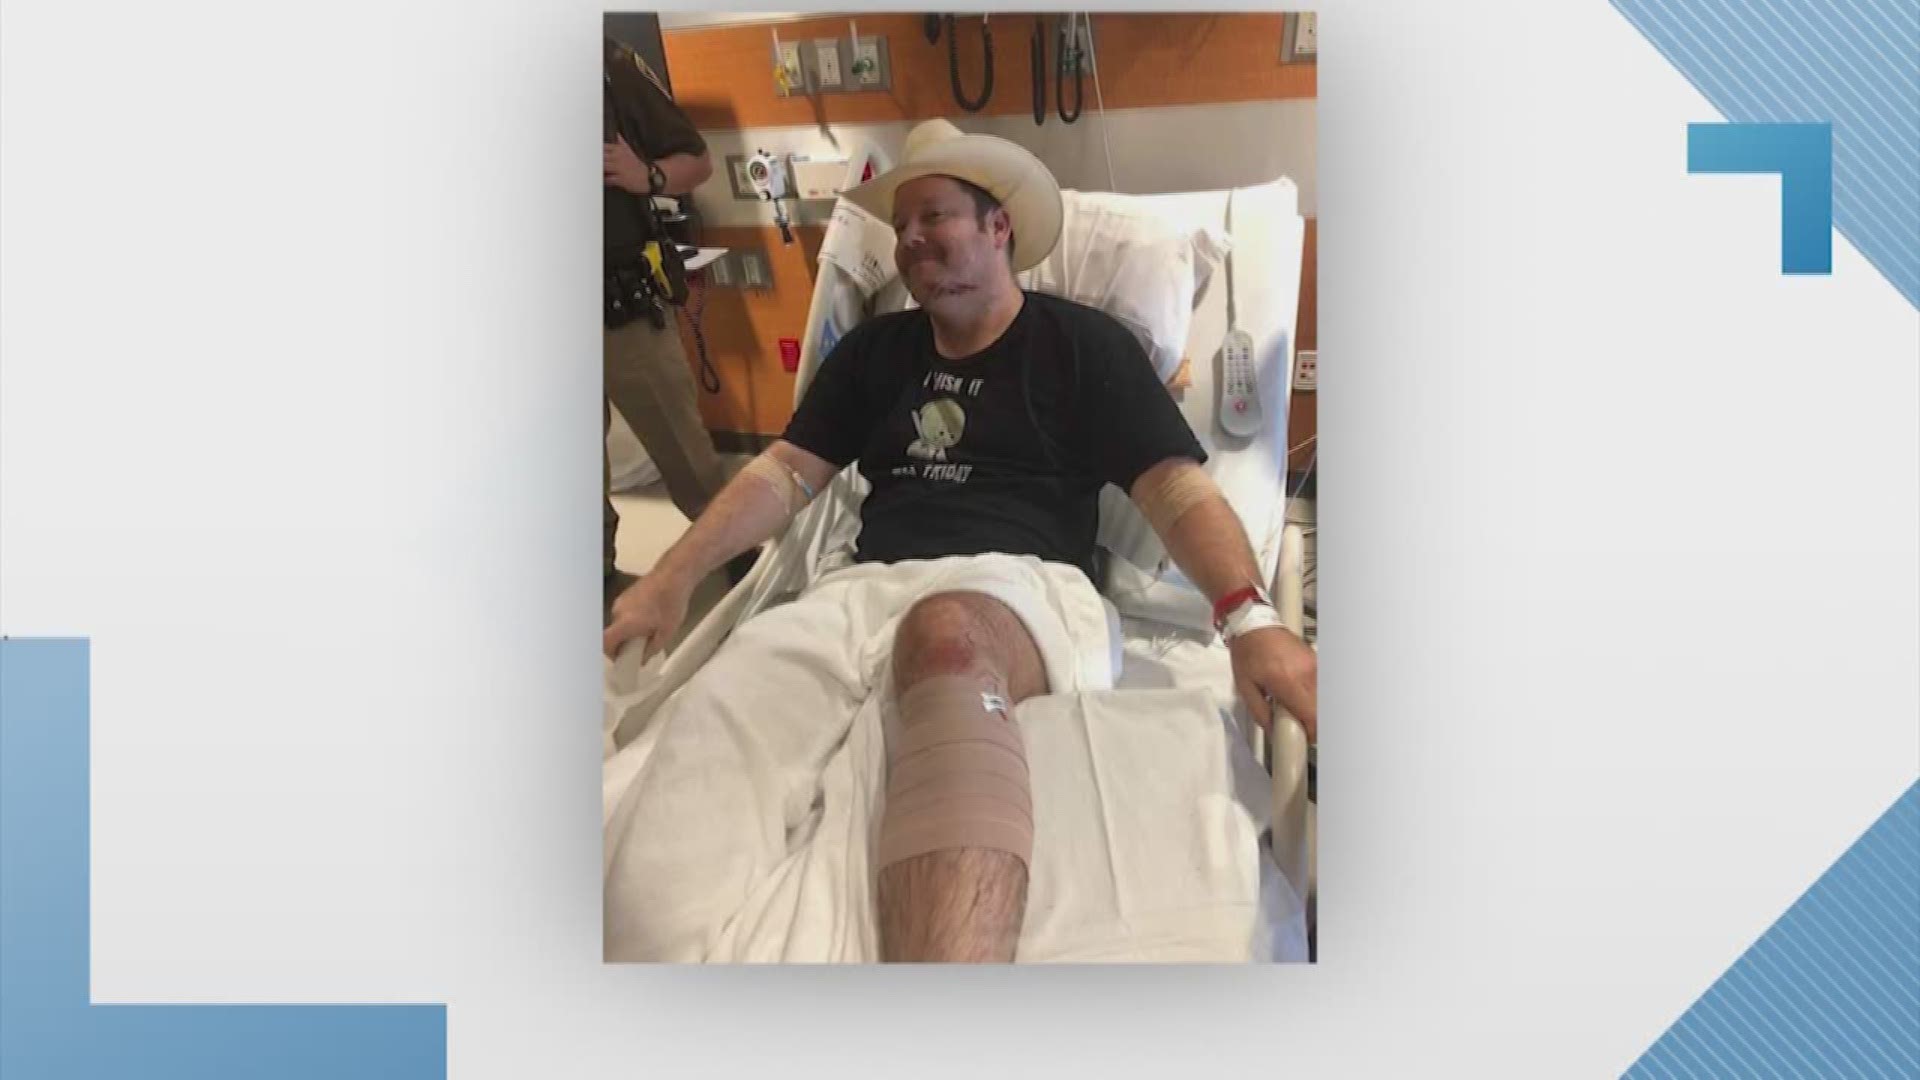 The Fort Bend County Sheriff's Office deputy who was wounded after responding to a domestic dispute earlier this week is expected to make a full recovery. Deputy J. Bulman, wearing a heavy bandage on his left calf and a cowboy hat, flashed a grin and tilt